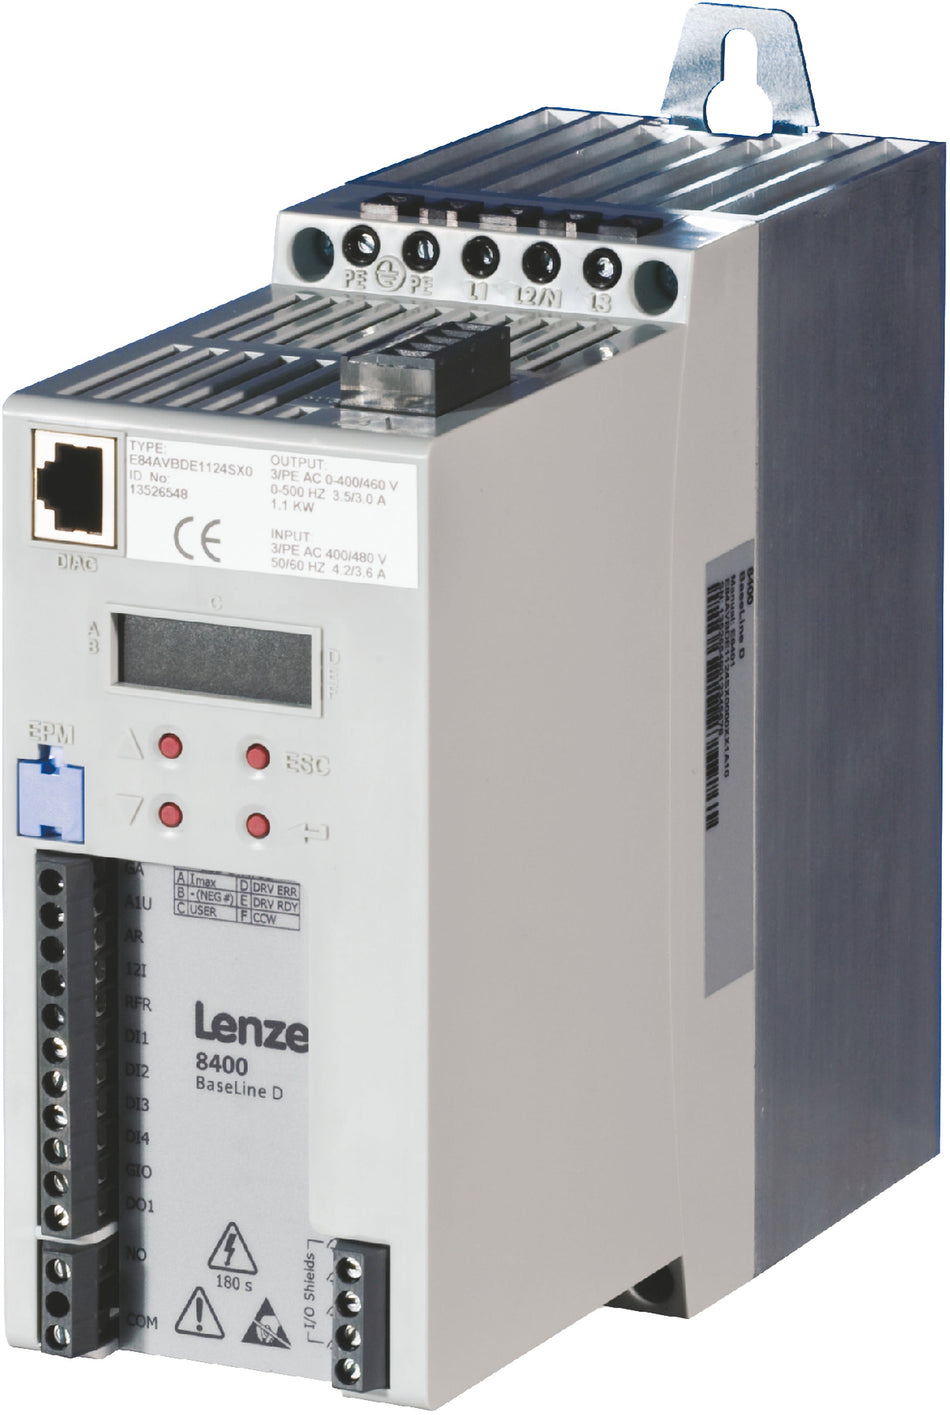 Lenze Frequency Inverter / Frequency Converter